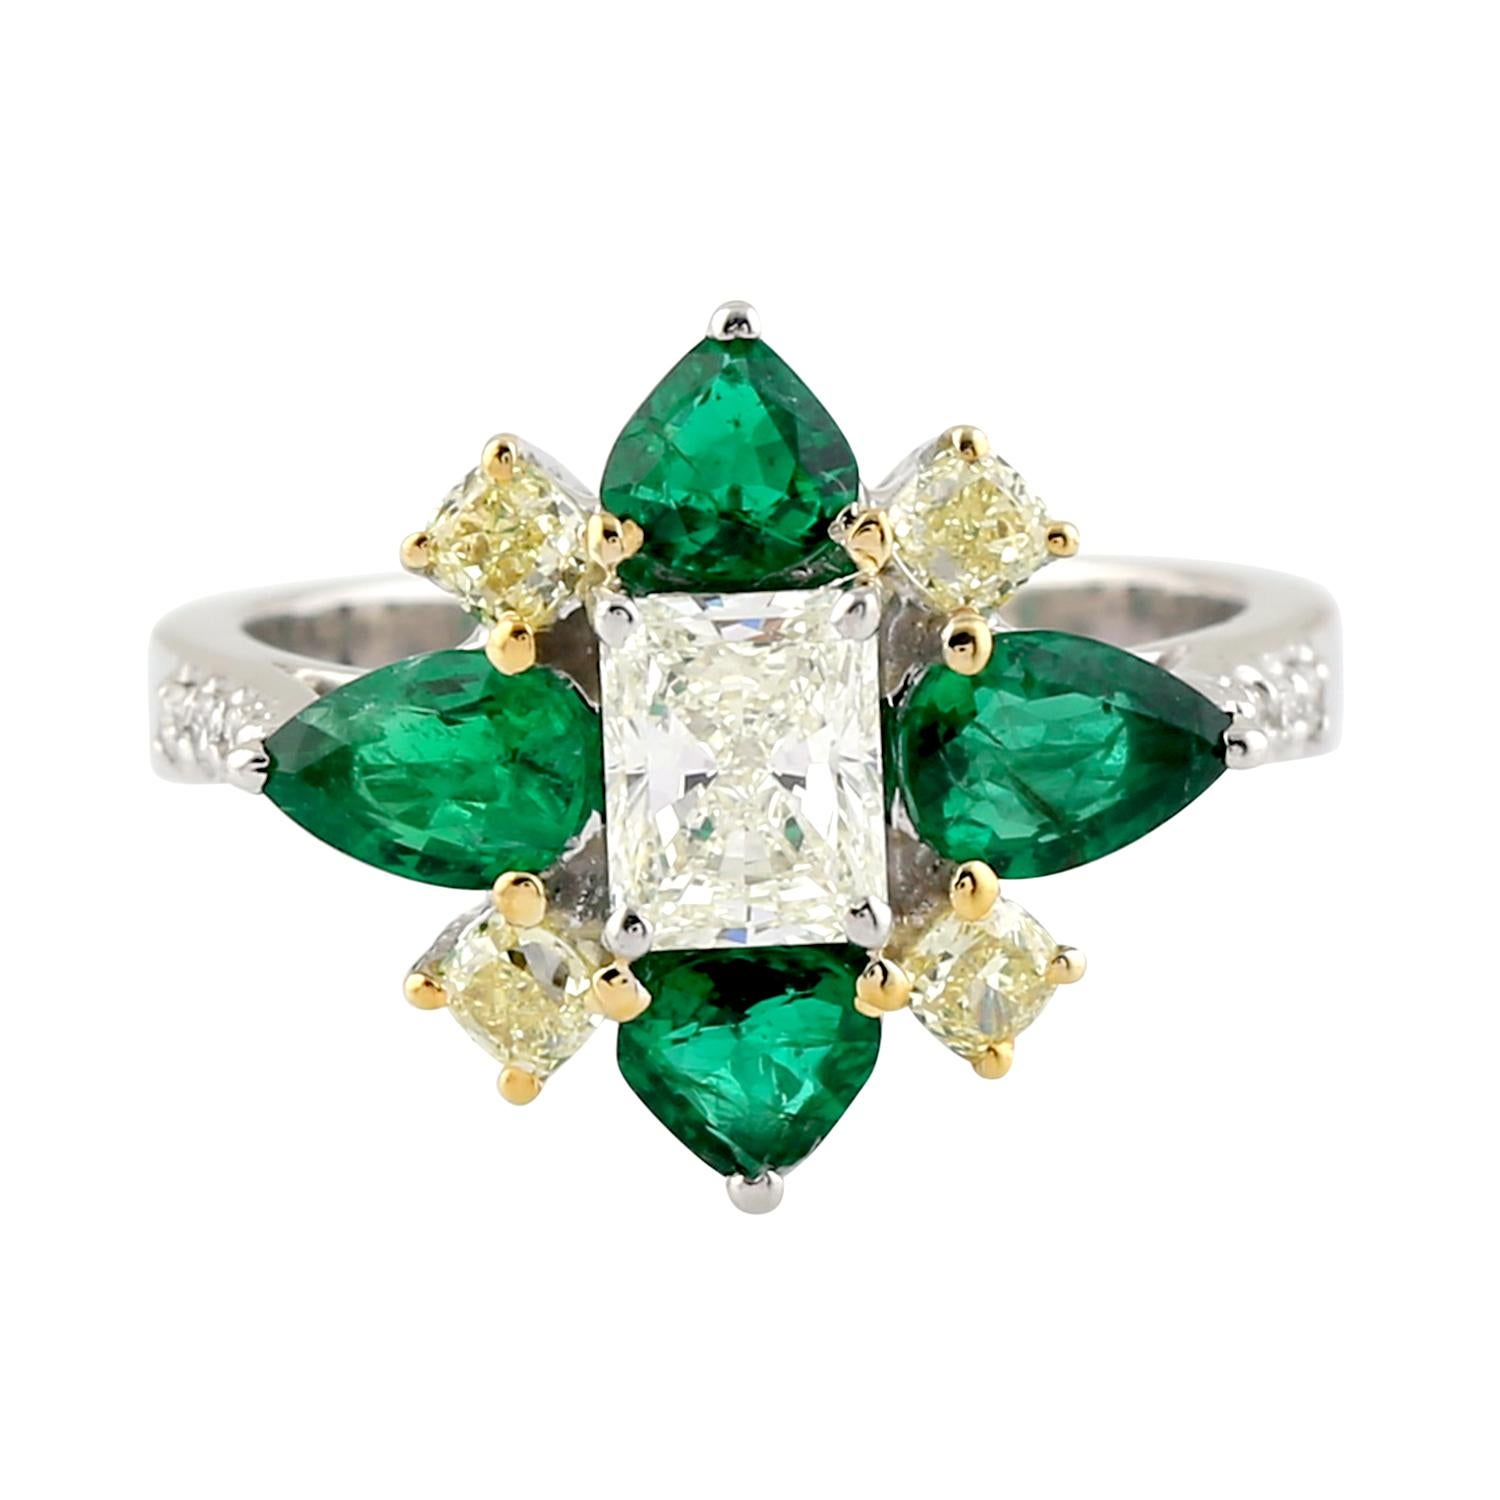 Step into the world of luxury and sophistication with this stunning flower-shaped ring made of 18k gold, featuring dazzling pear-shaped emeralds surrounded by glittering diamonds. The unique design of the ring resembles a blooming flower, with the